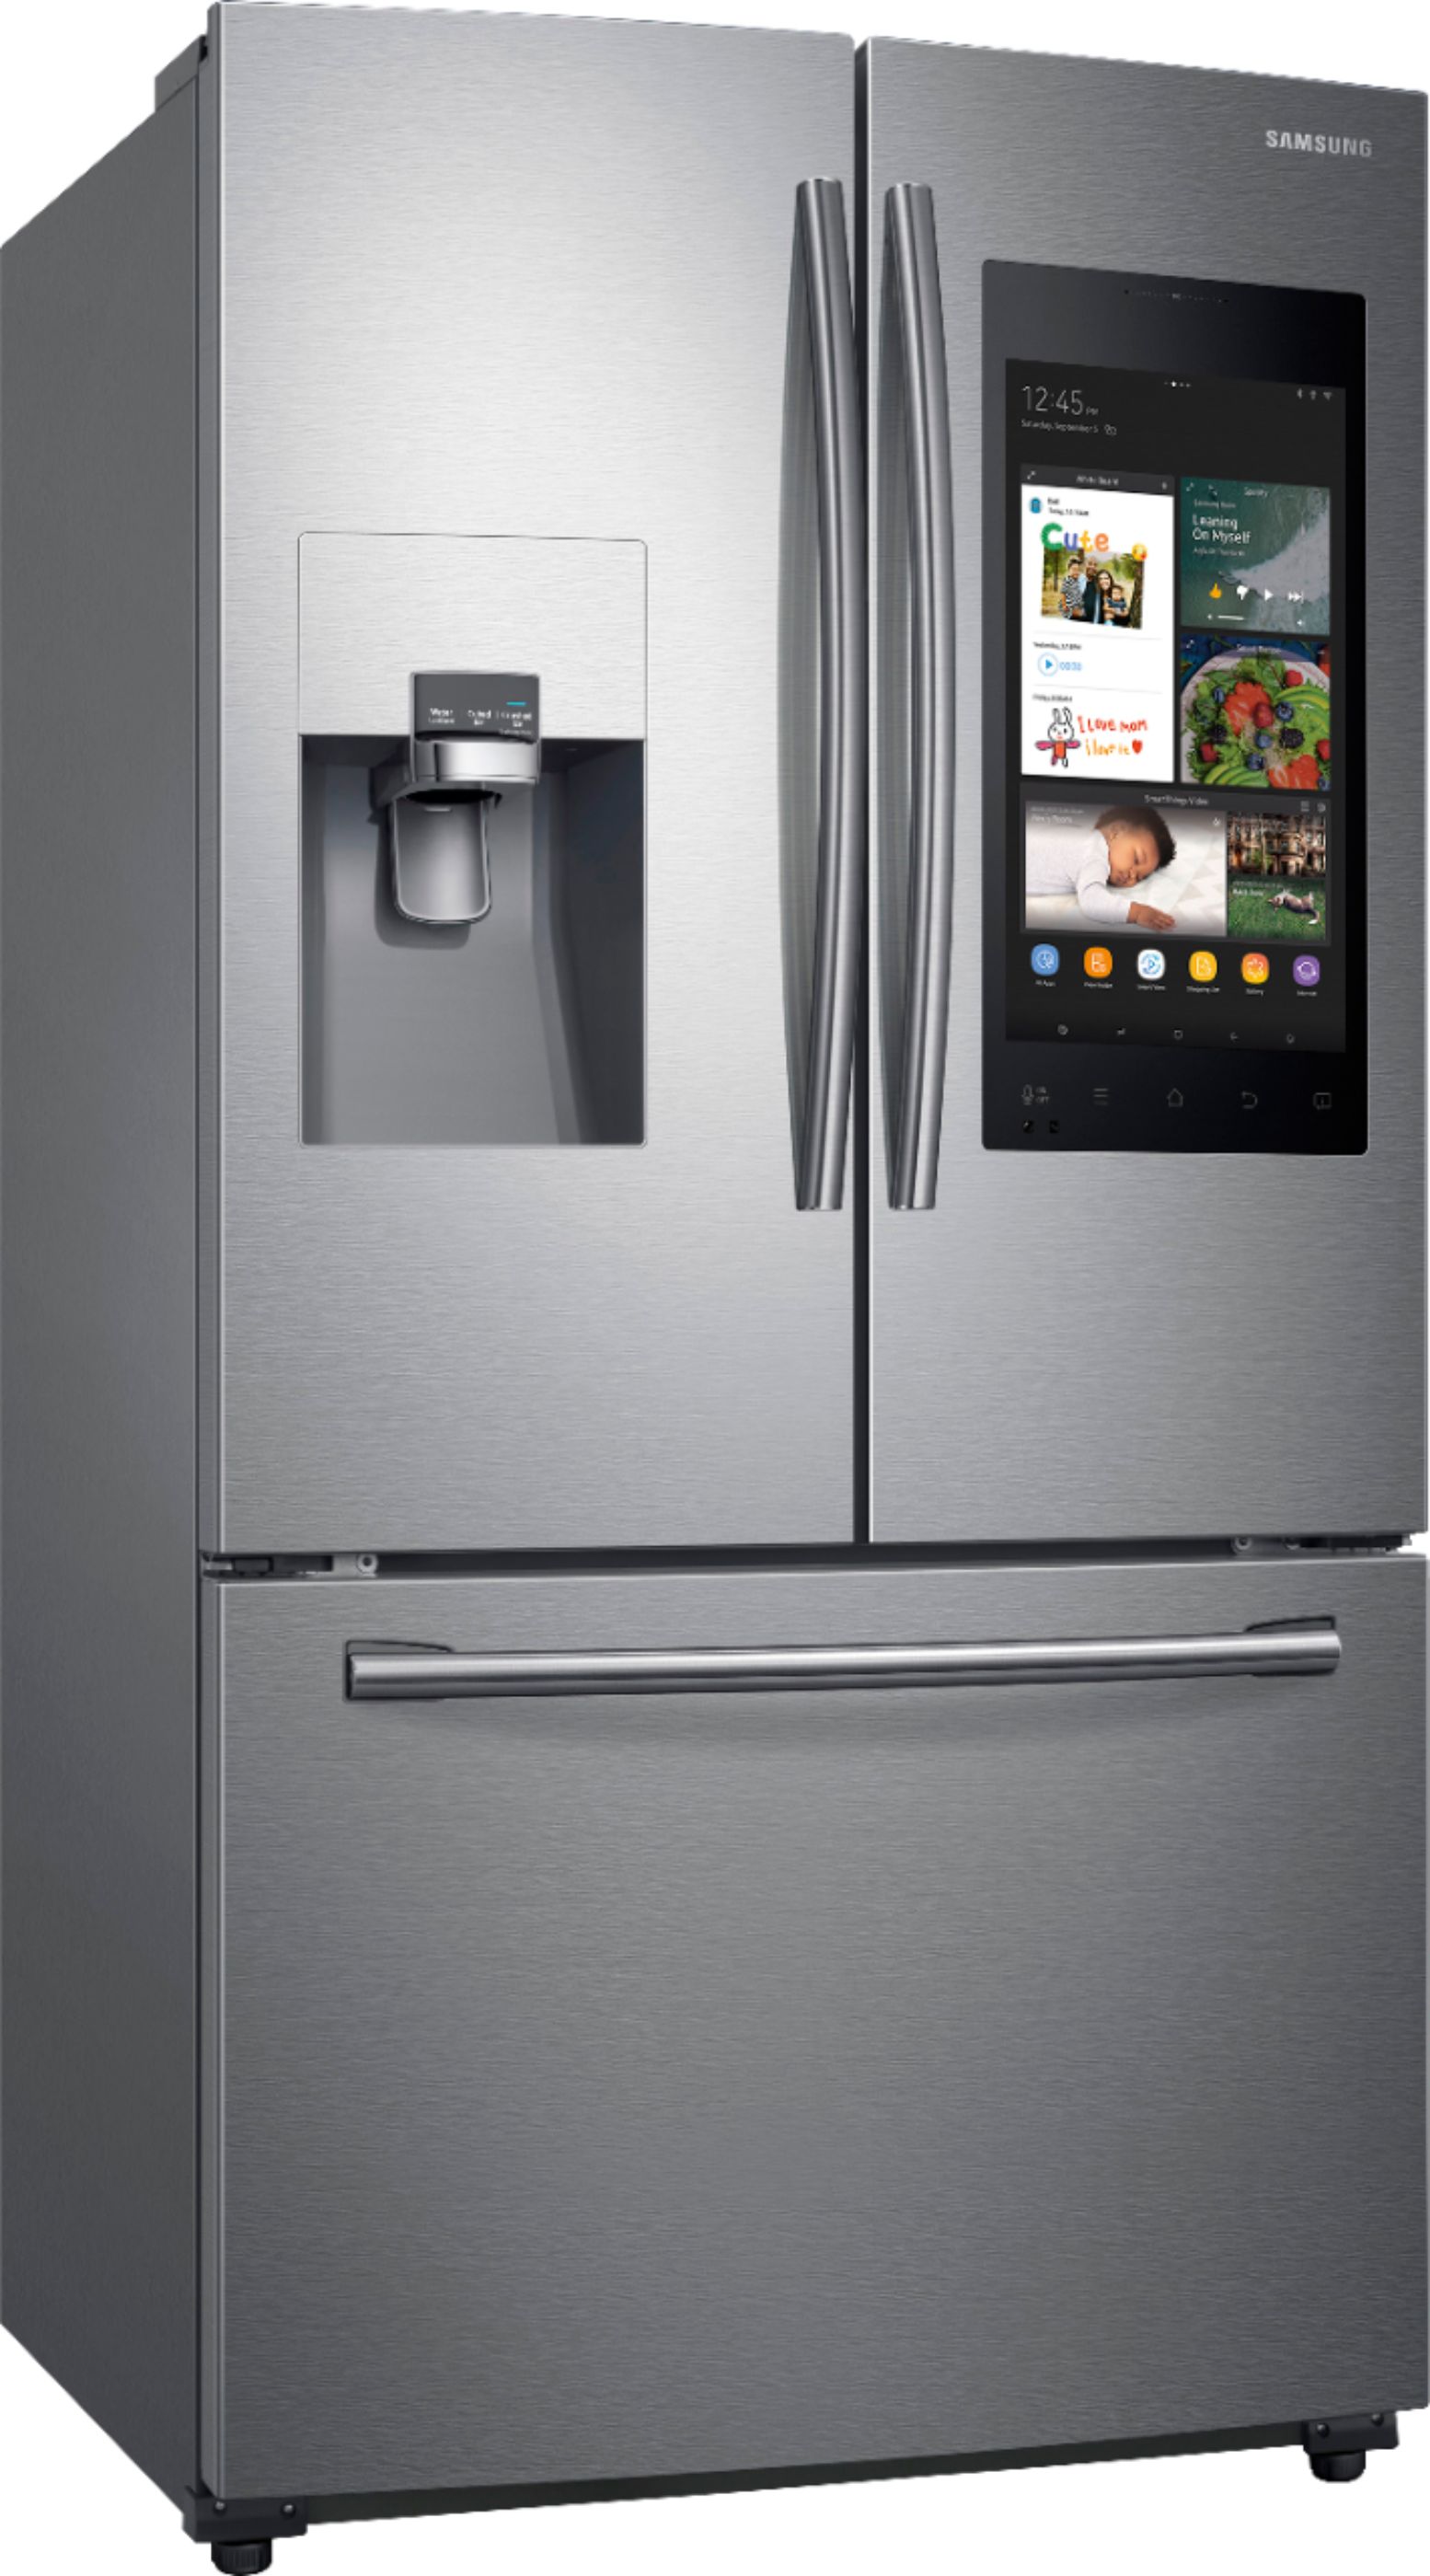 Angle View: Samsung - Family Hub 24.2 Cu. Ft. 3-Door French Door Refrigerator - Stainless steel